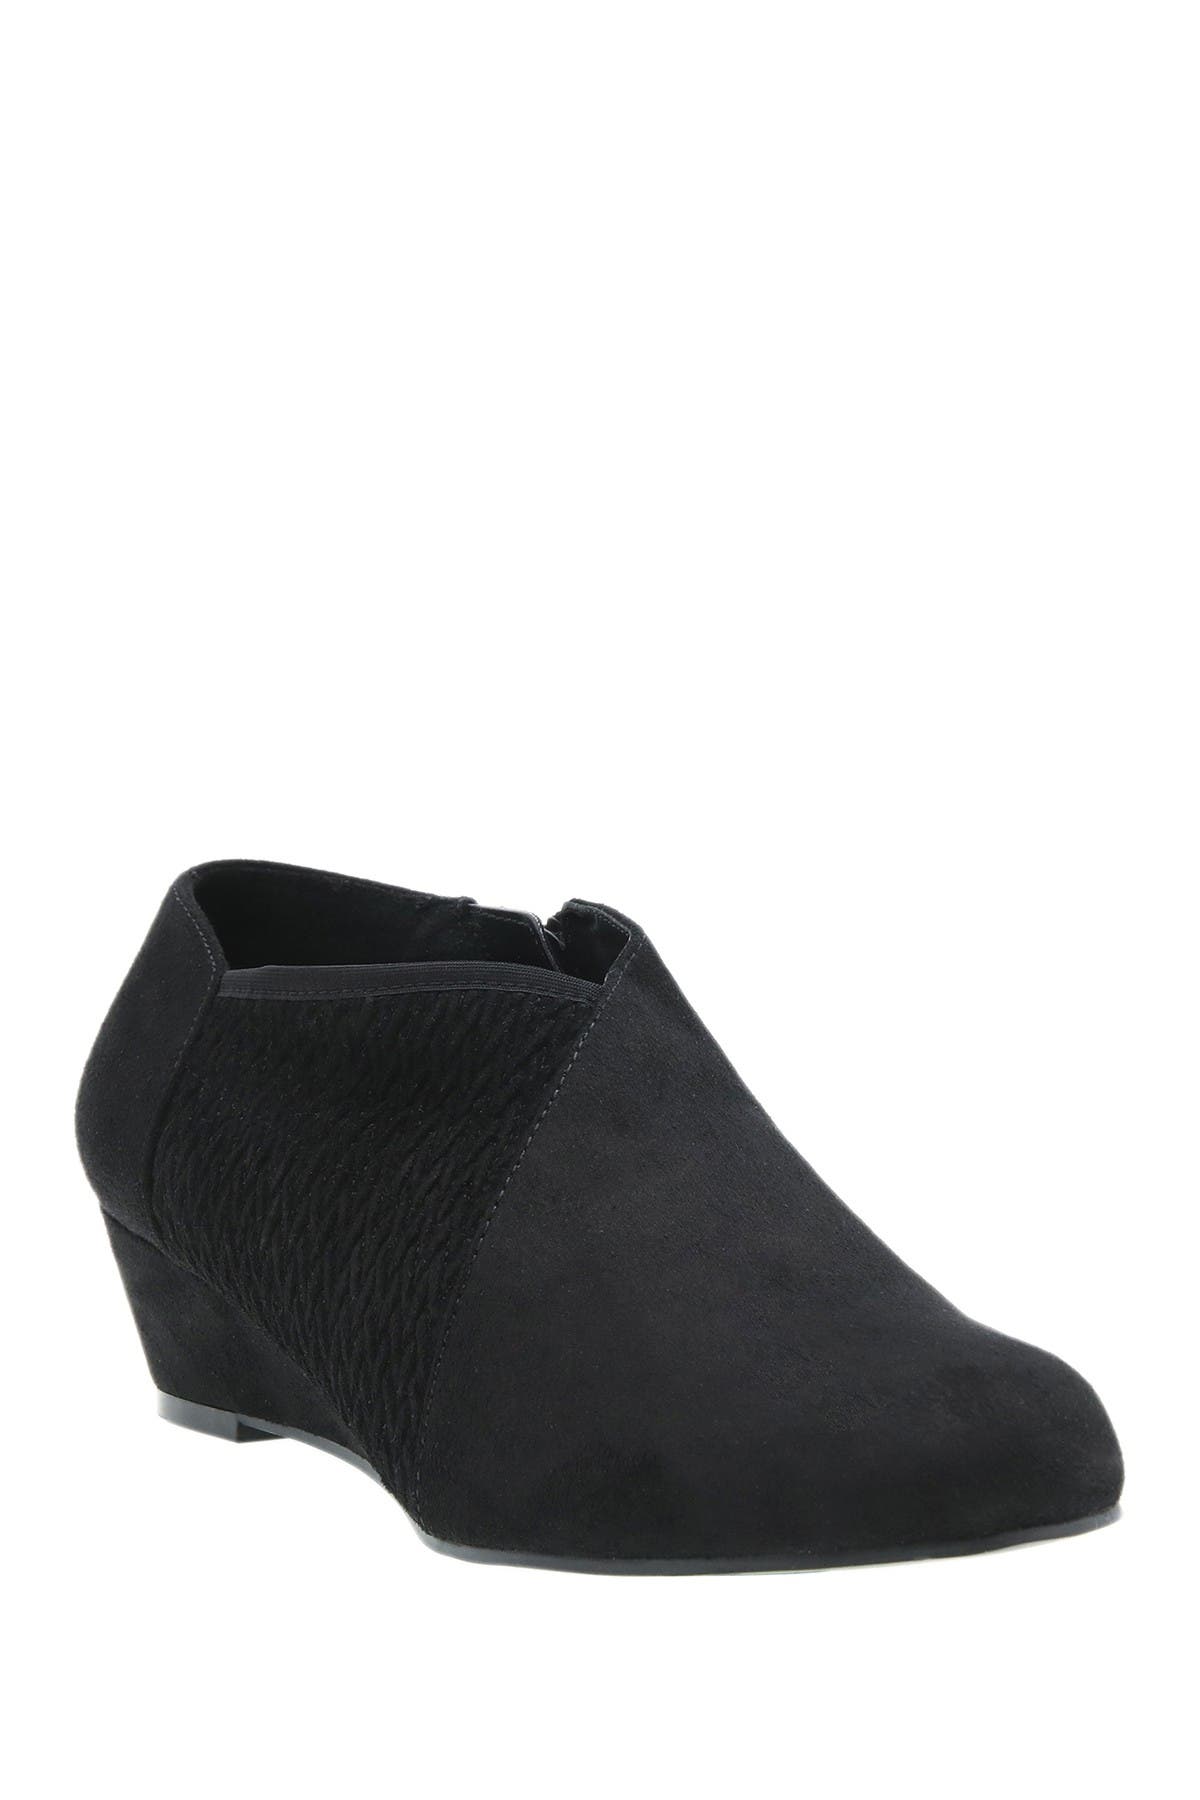 Garvis Stretch Wedge Ankle Bootie 